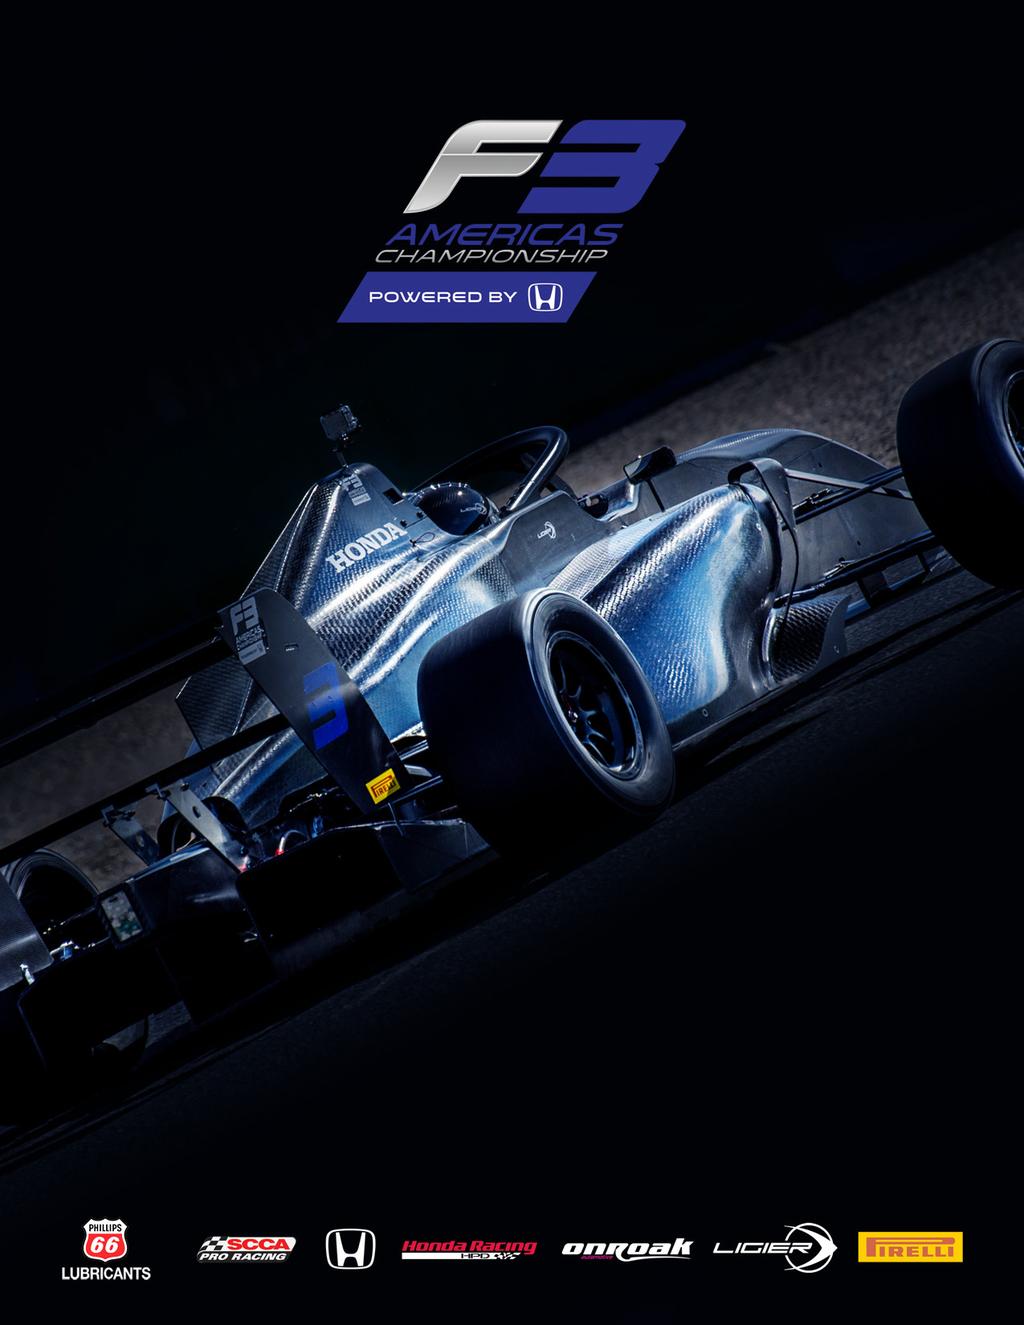 f3 americas media guide REDEFINING GLOBAL RACING With innovations in safety and affordabilitythe F3 Americas Championship is designed to attract the